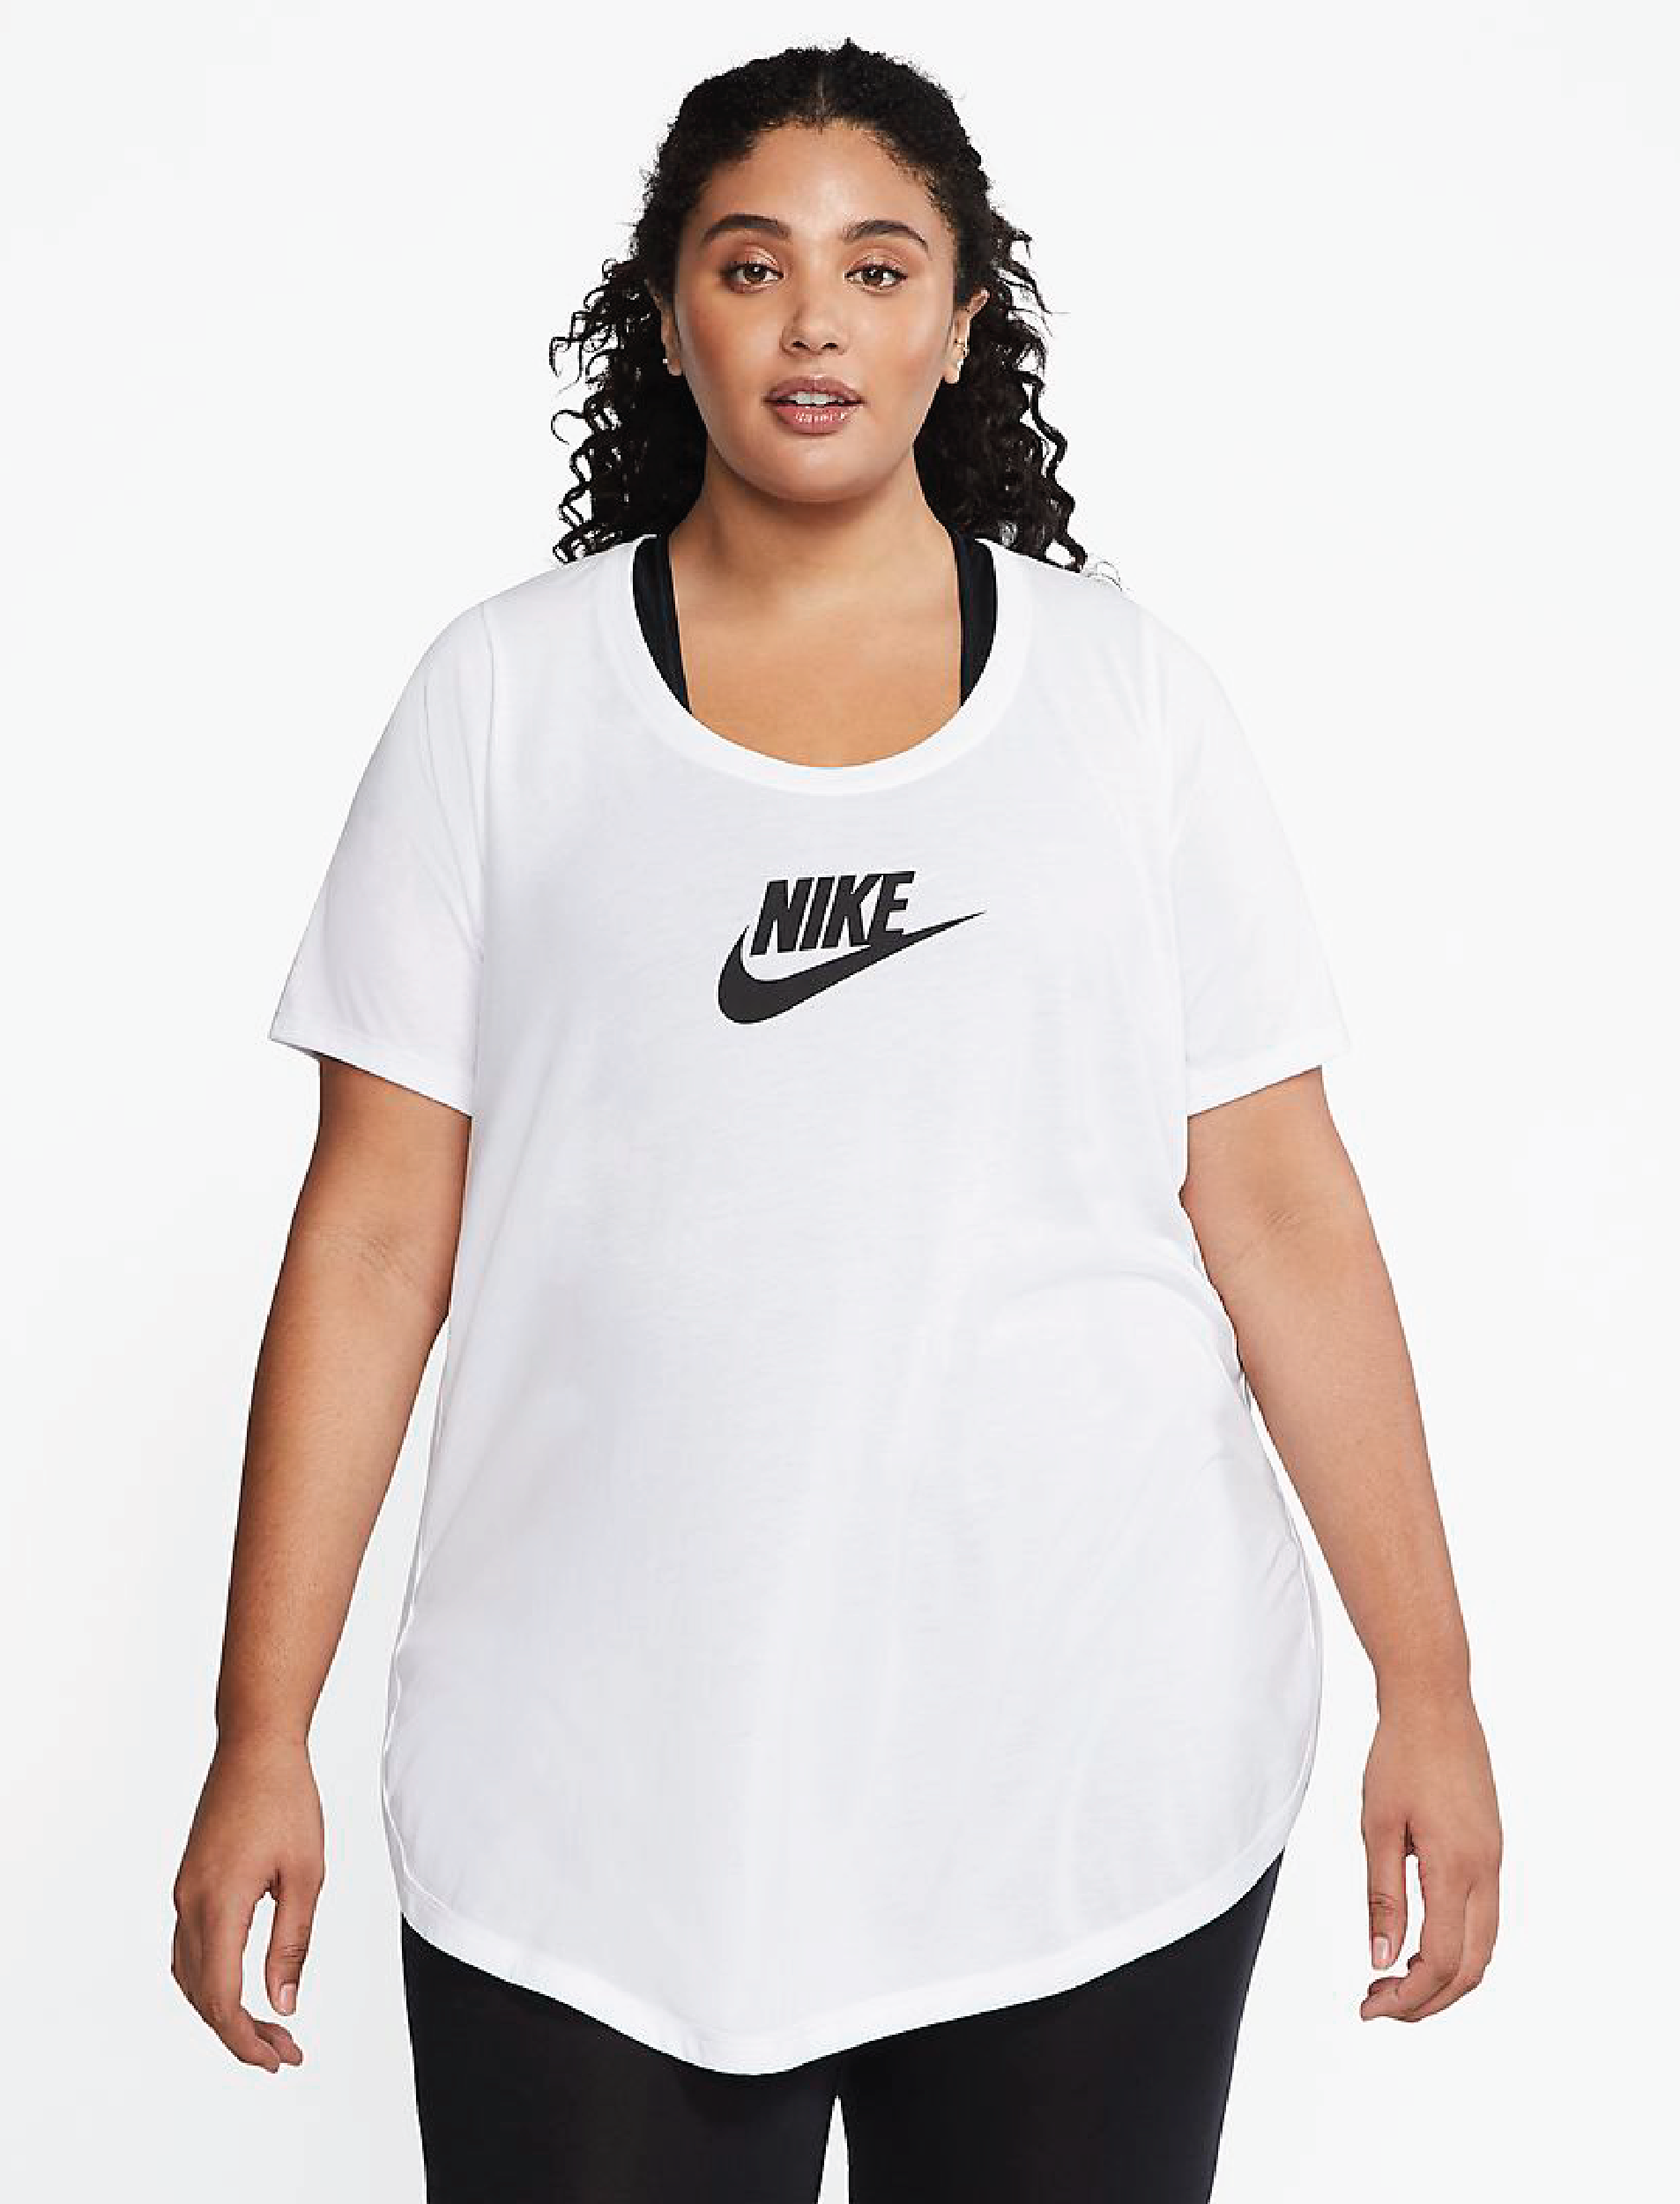 A model wearing the tunic in white with the black Nike logo and swoosh in the center